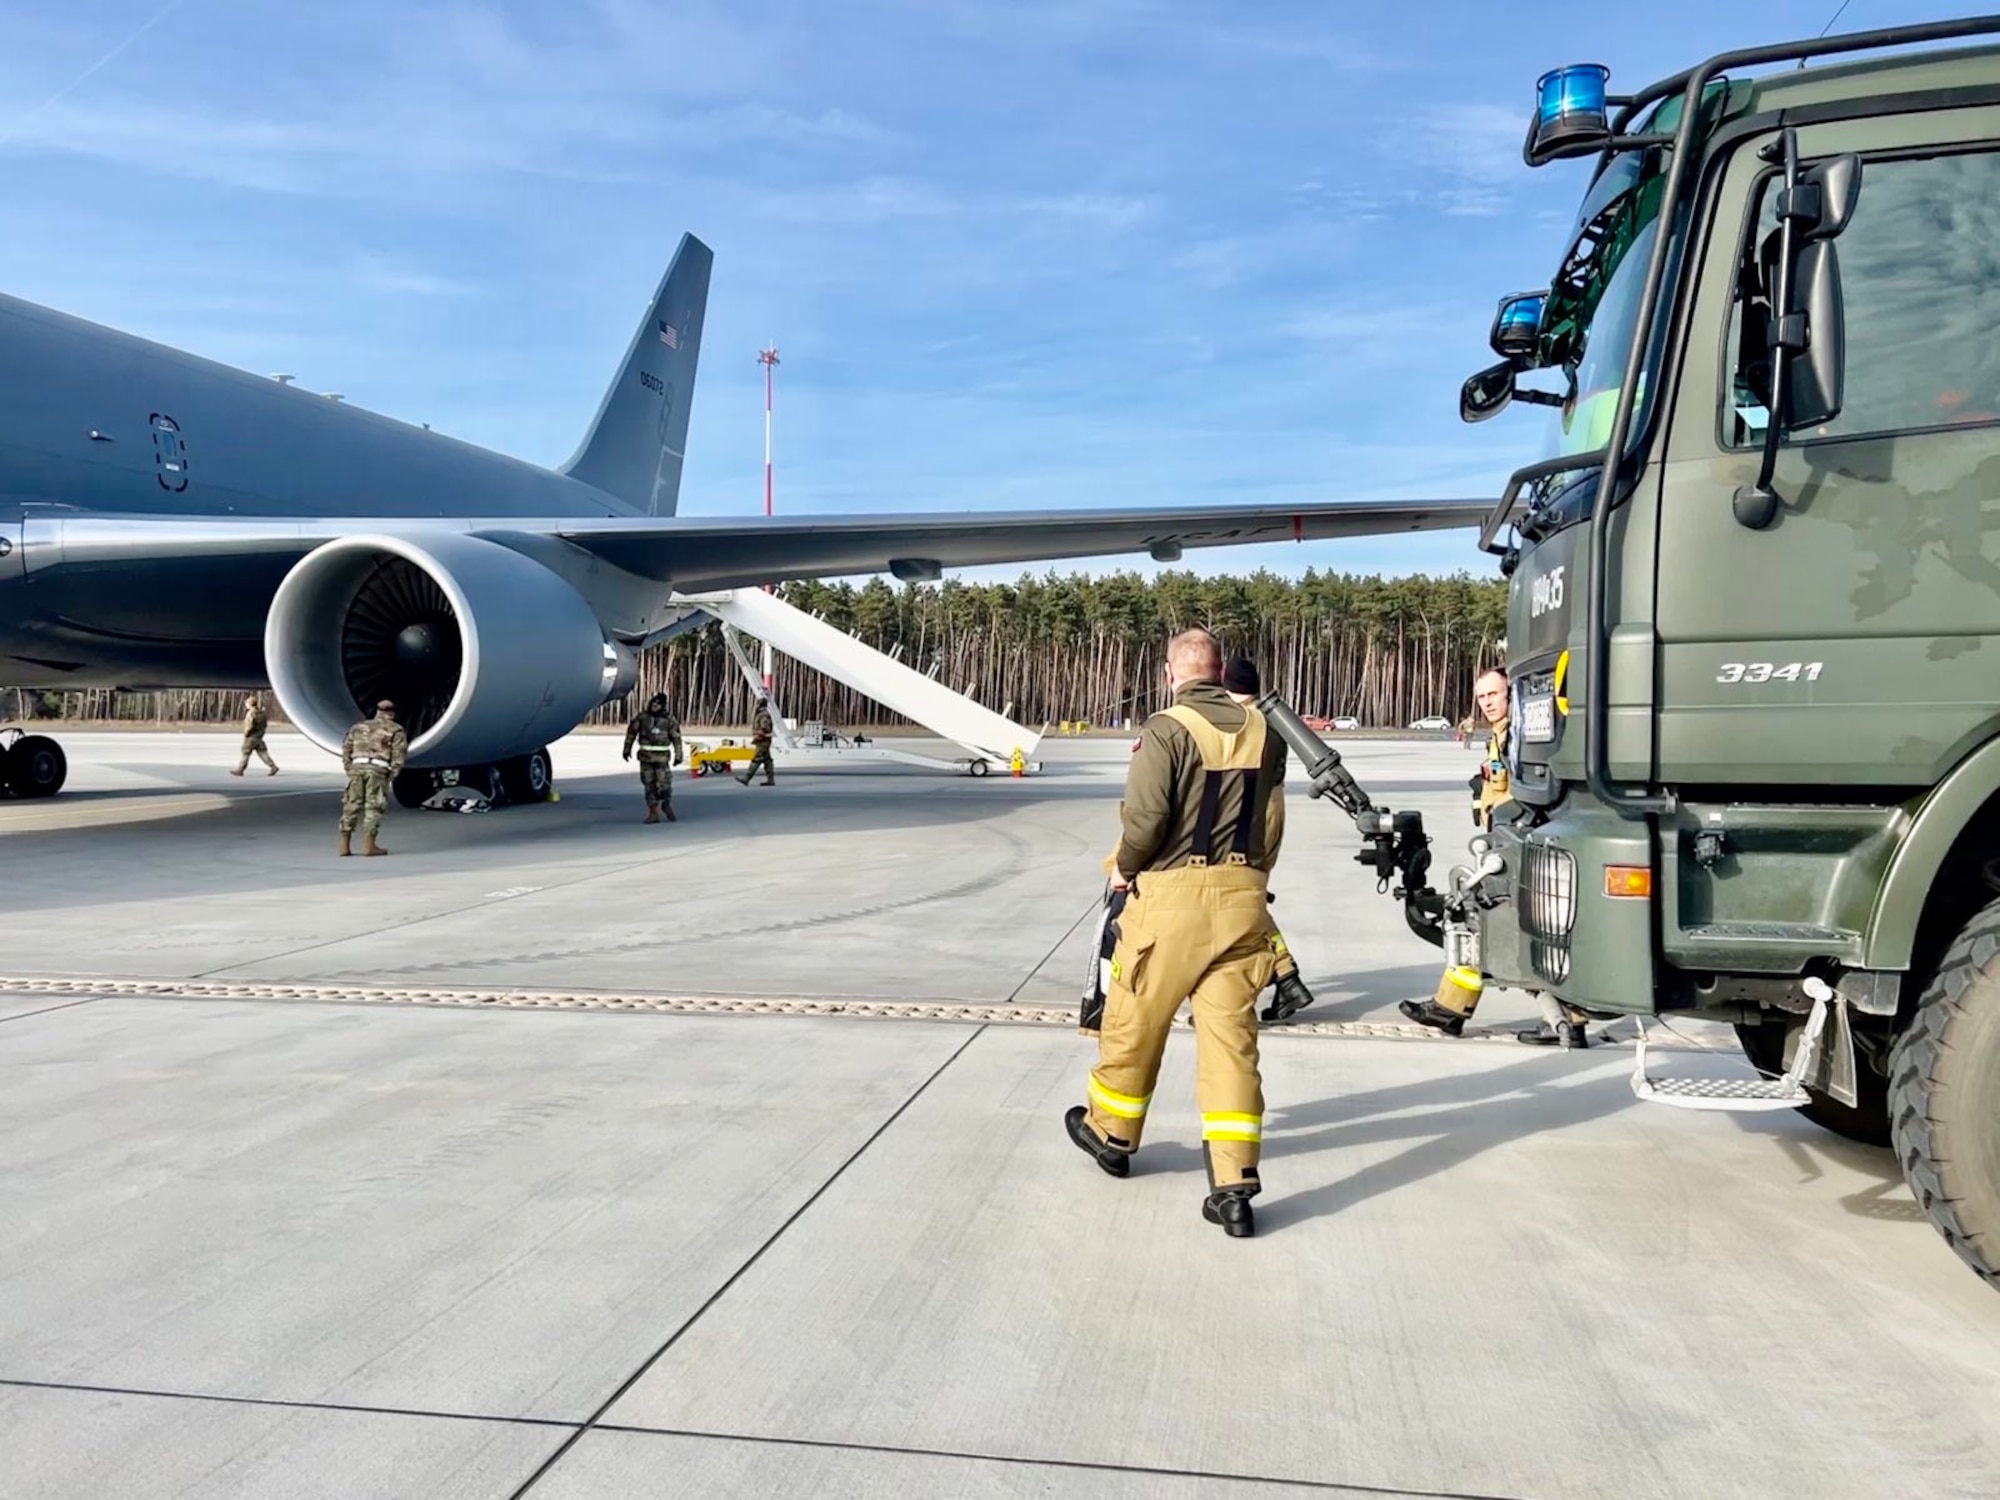 A Polish Fire Brigade at Powidz Air Base, Poland train U.S. KC-46A Pegasus tanker crew from the 514th Air Mobility Wing, primarily stationed at McGuire Air Force Base, N.J.